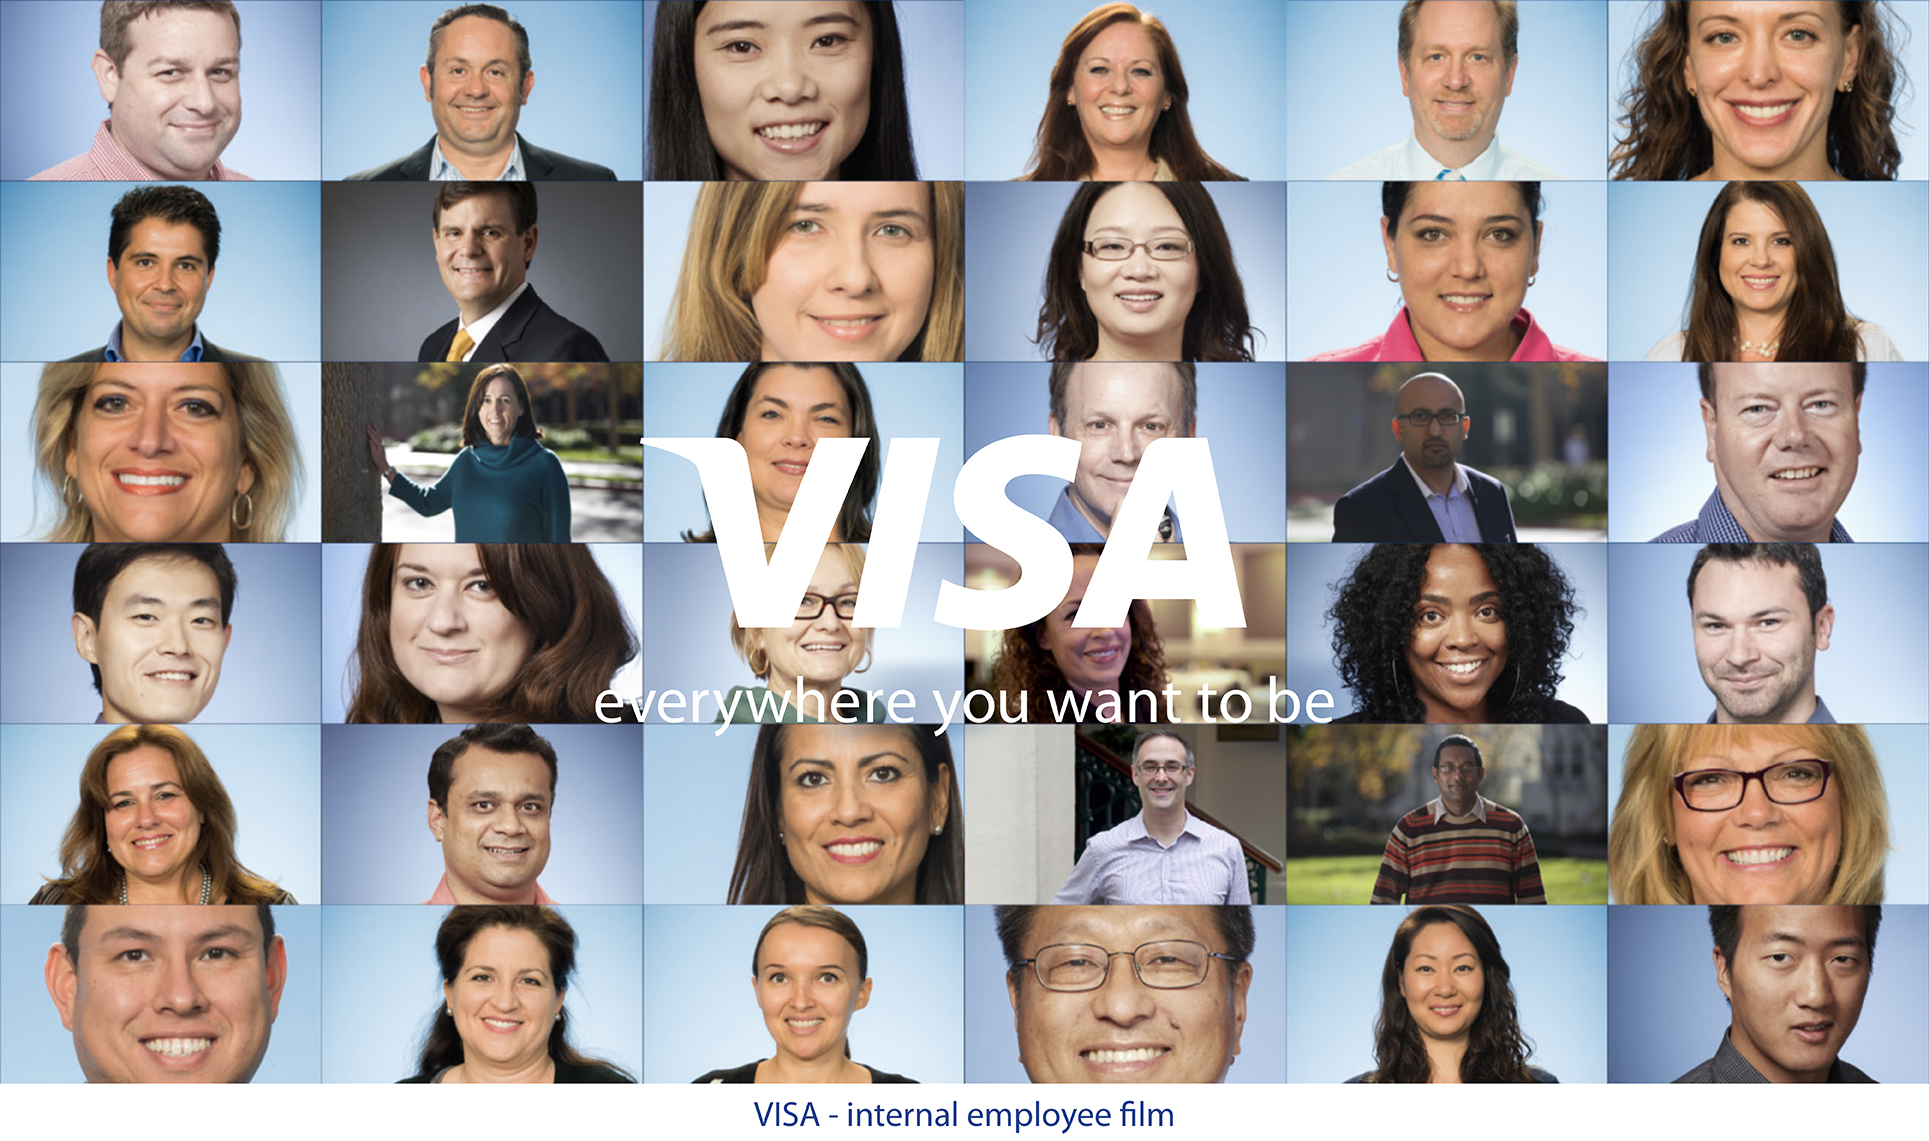 A collage of smiling portraits and a white Visa logo overlaid in the center.